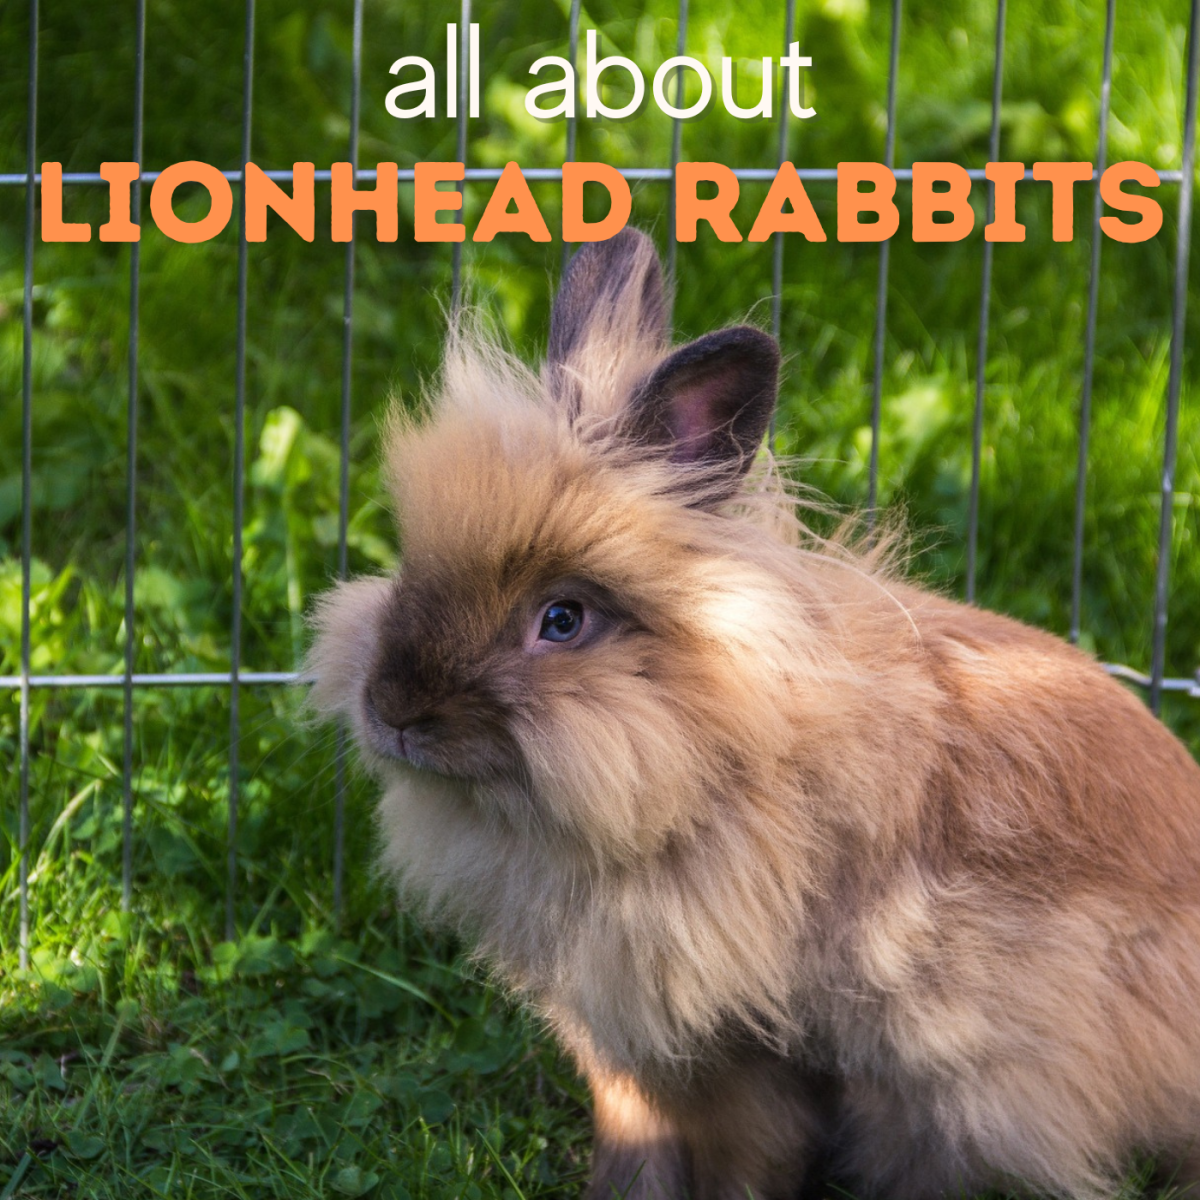 Lionhead Rabbits: All About These Cute and Unusual Bunnies